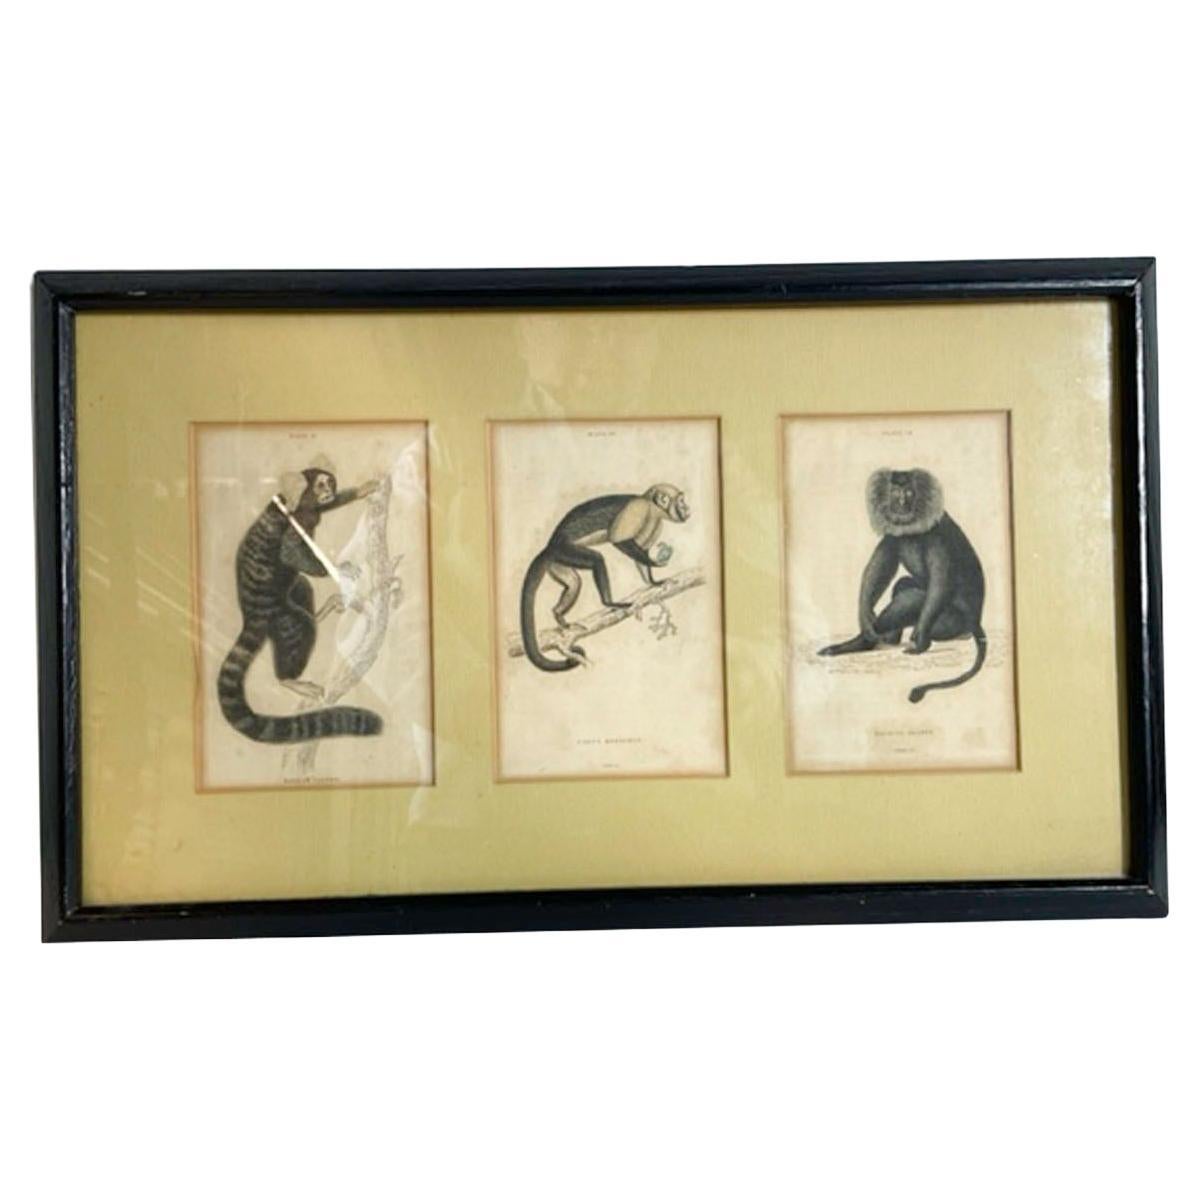 Three 18th/19th C. Hand-Colored Engravings of Monkeys Matted and Framed Together